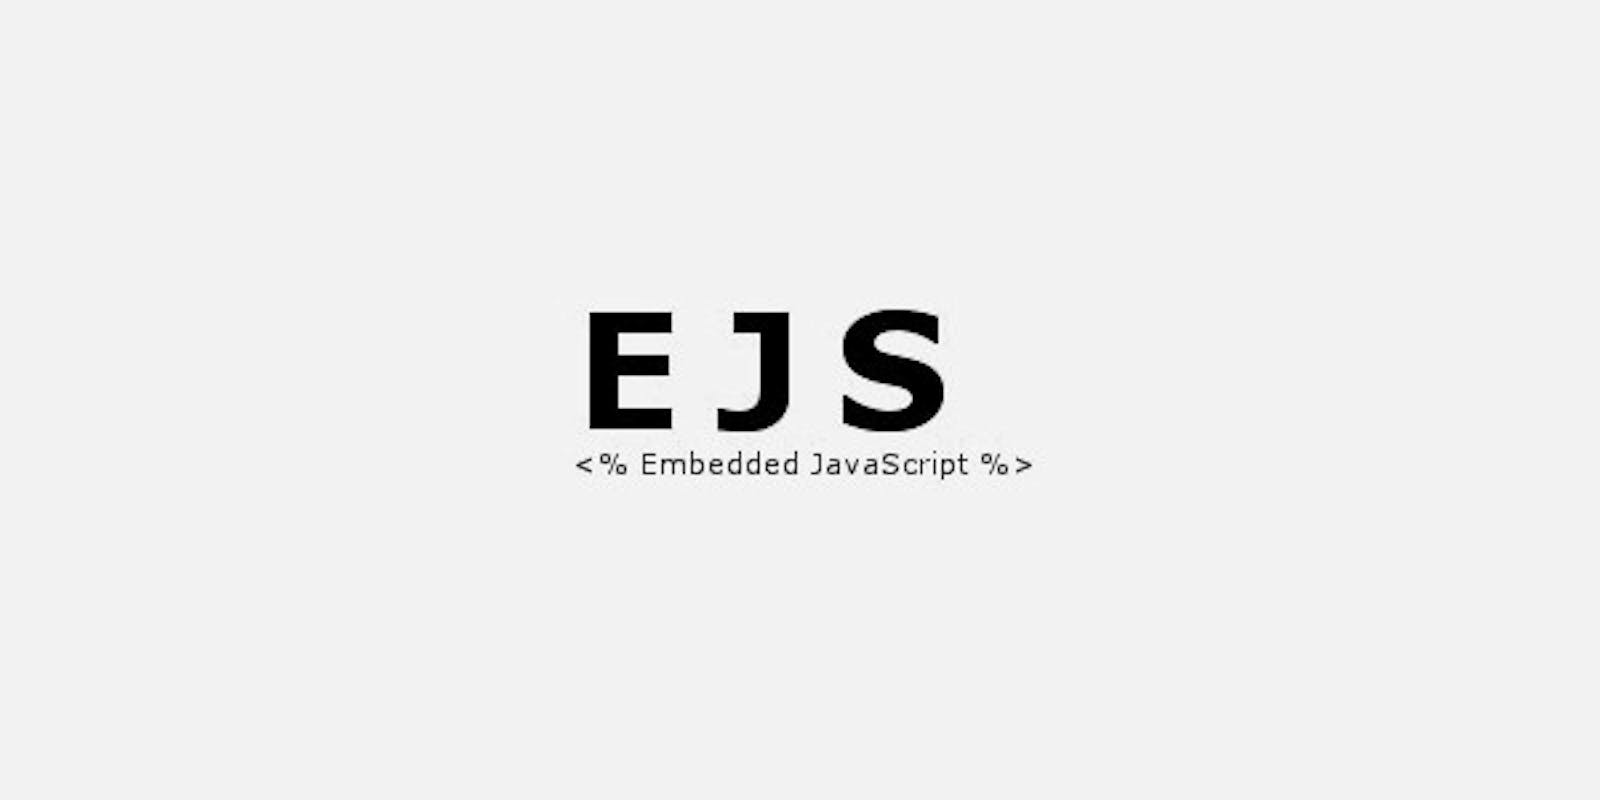 Passing Data to EJS Template